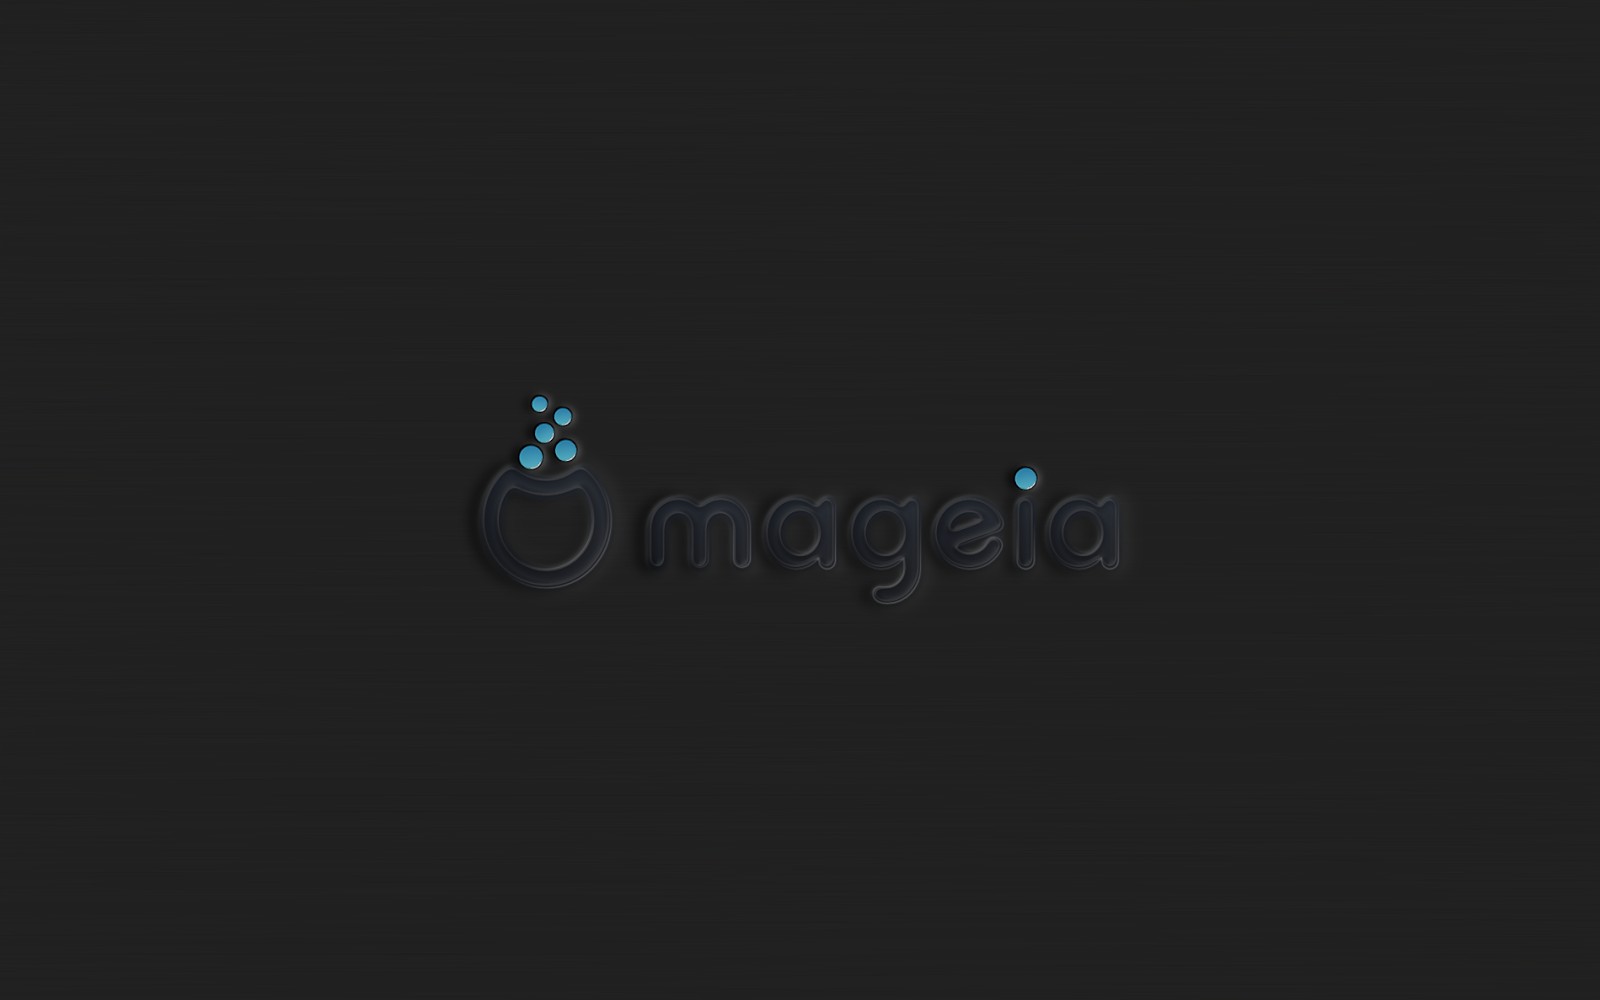 Linux Mageia Wallpaper HD Desktop And Mobile Background